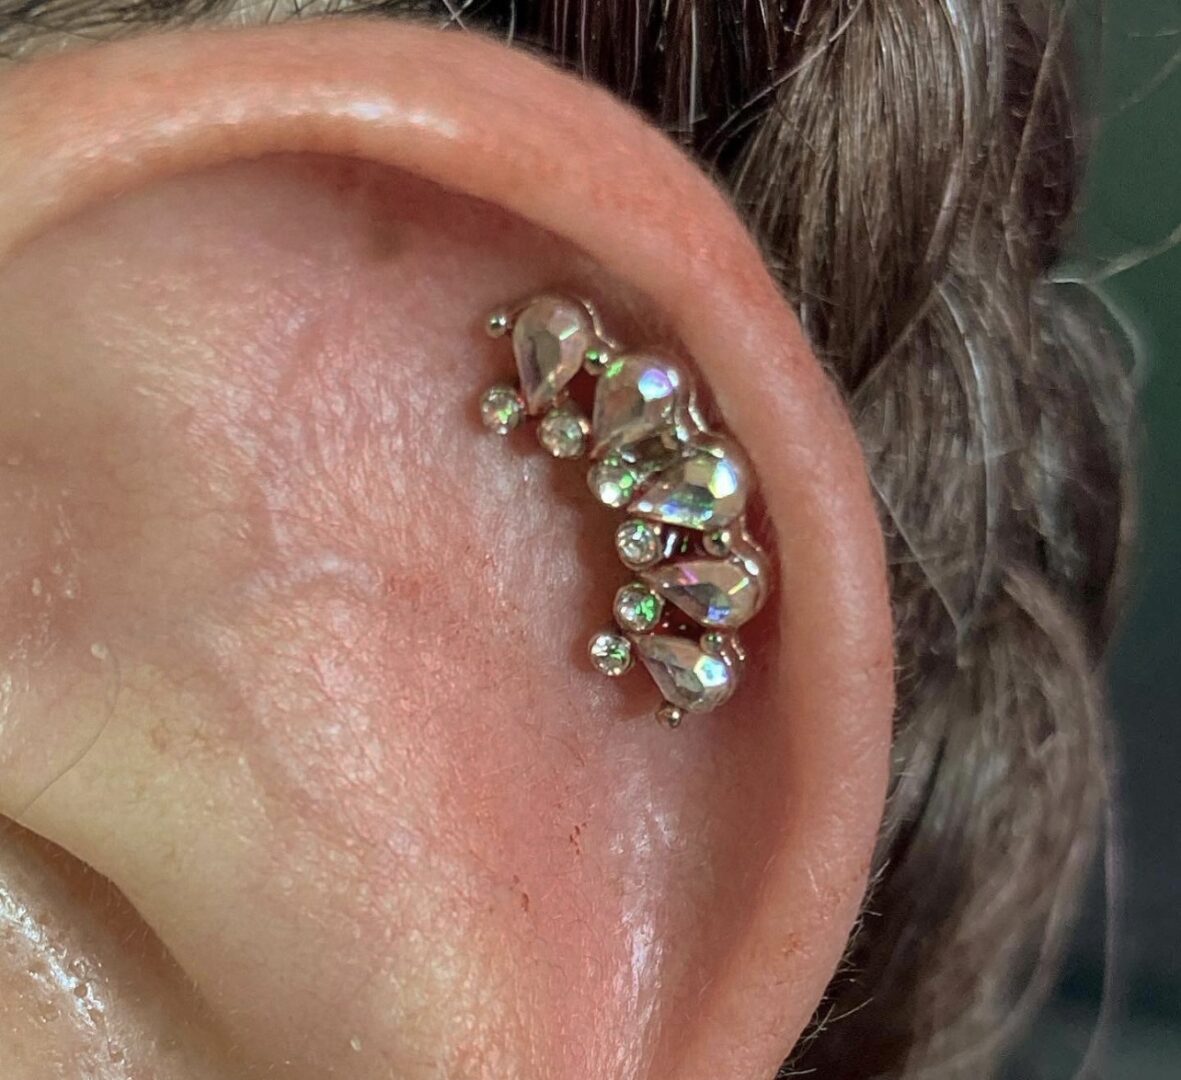 A close up of an ear with some kind of piercing